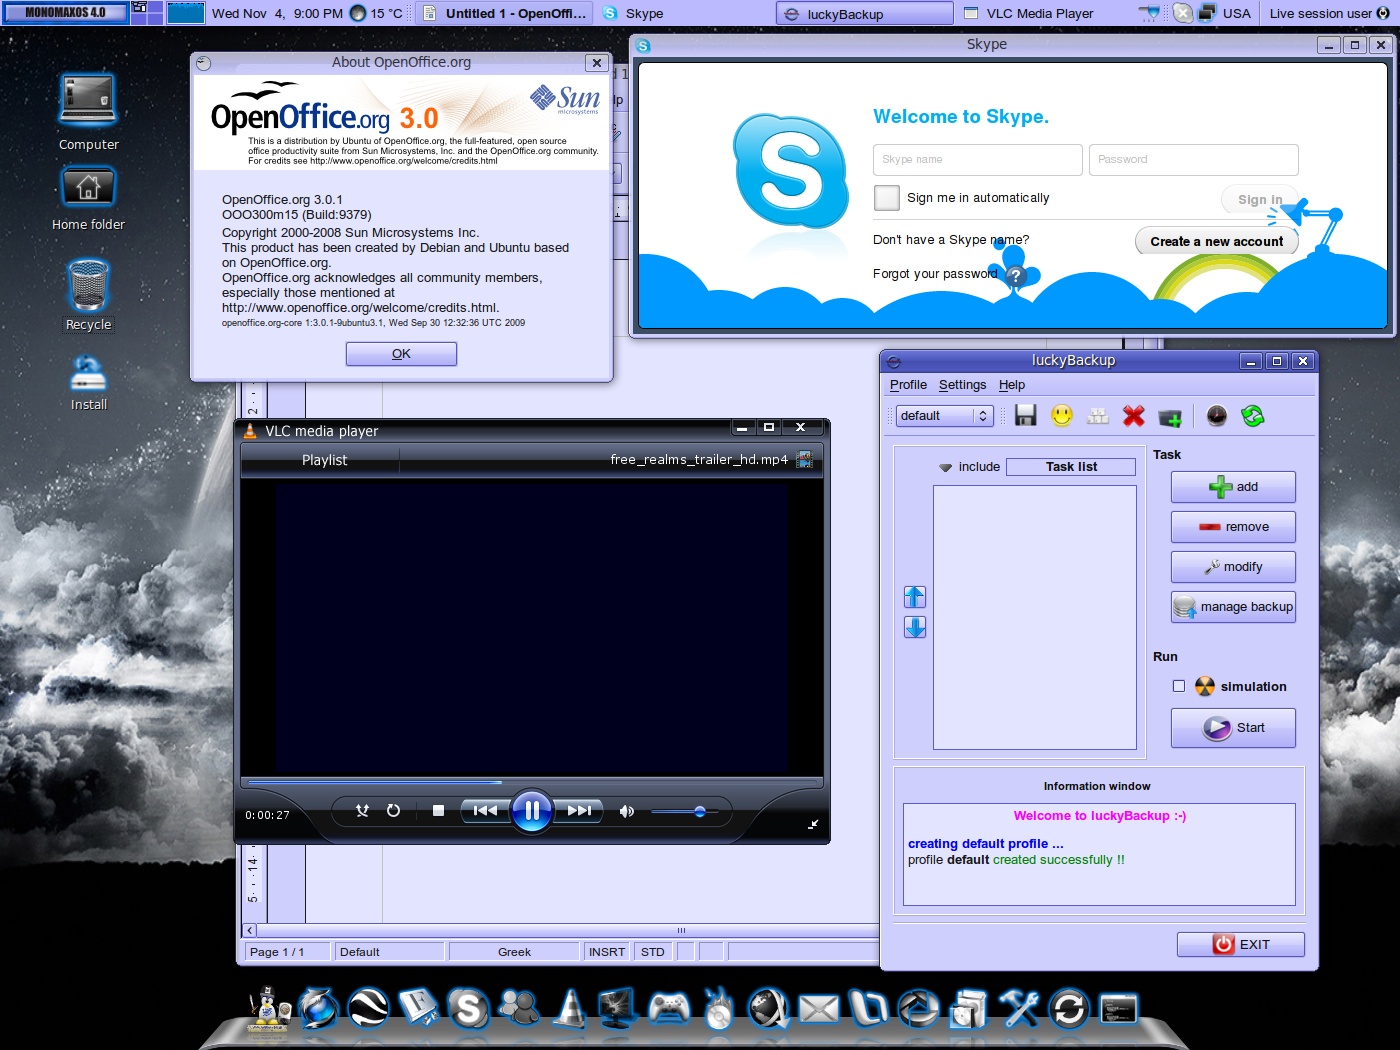 Download Xvideoservicethief os linux